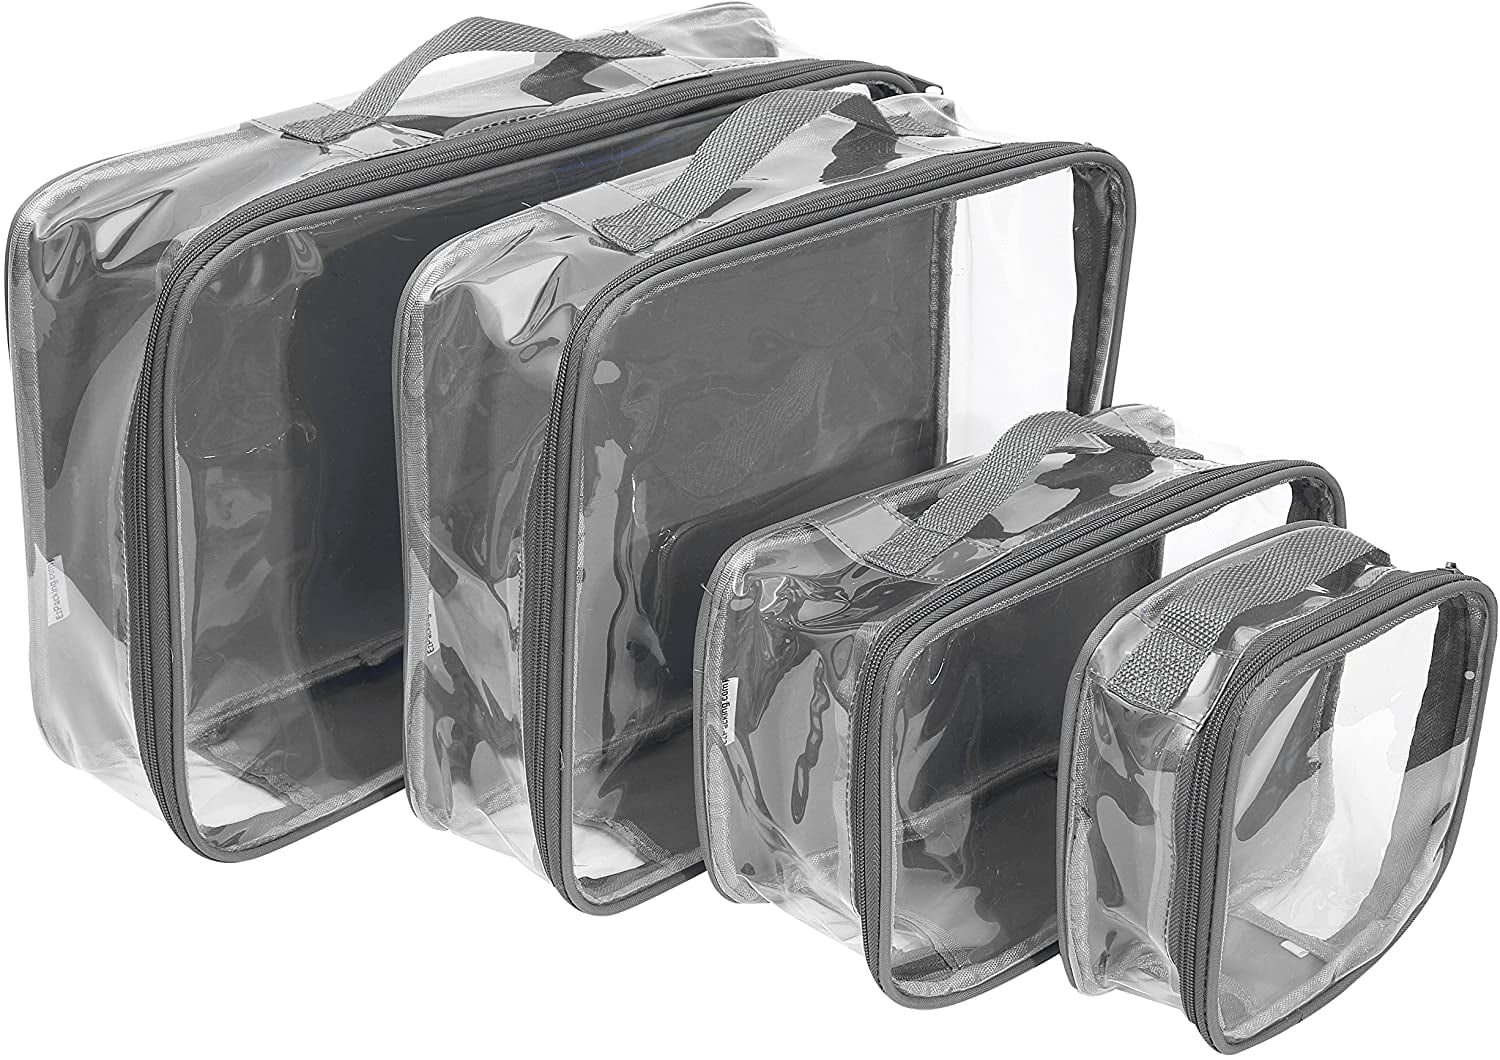 Medium Clear Travel Packing Cube See-Through Clothes Organizer for Suitcase 